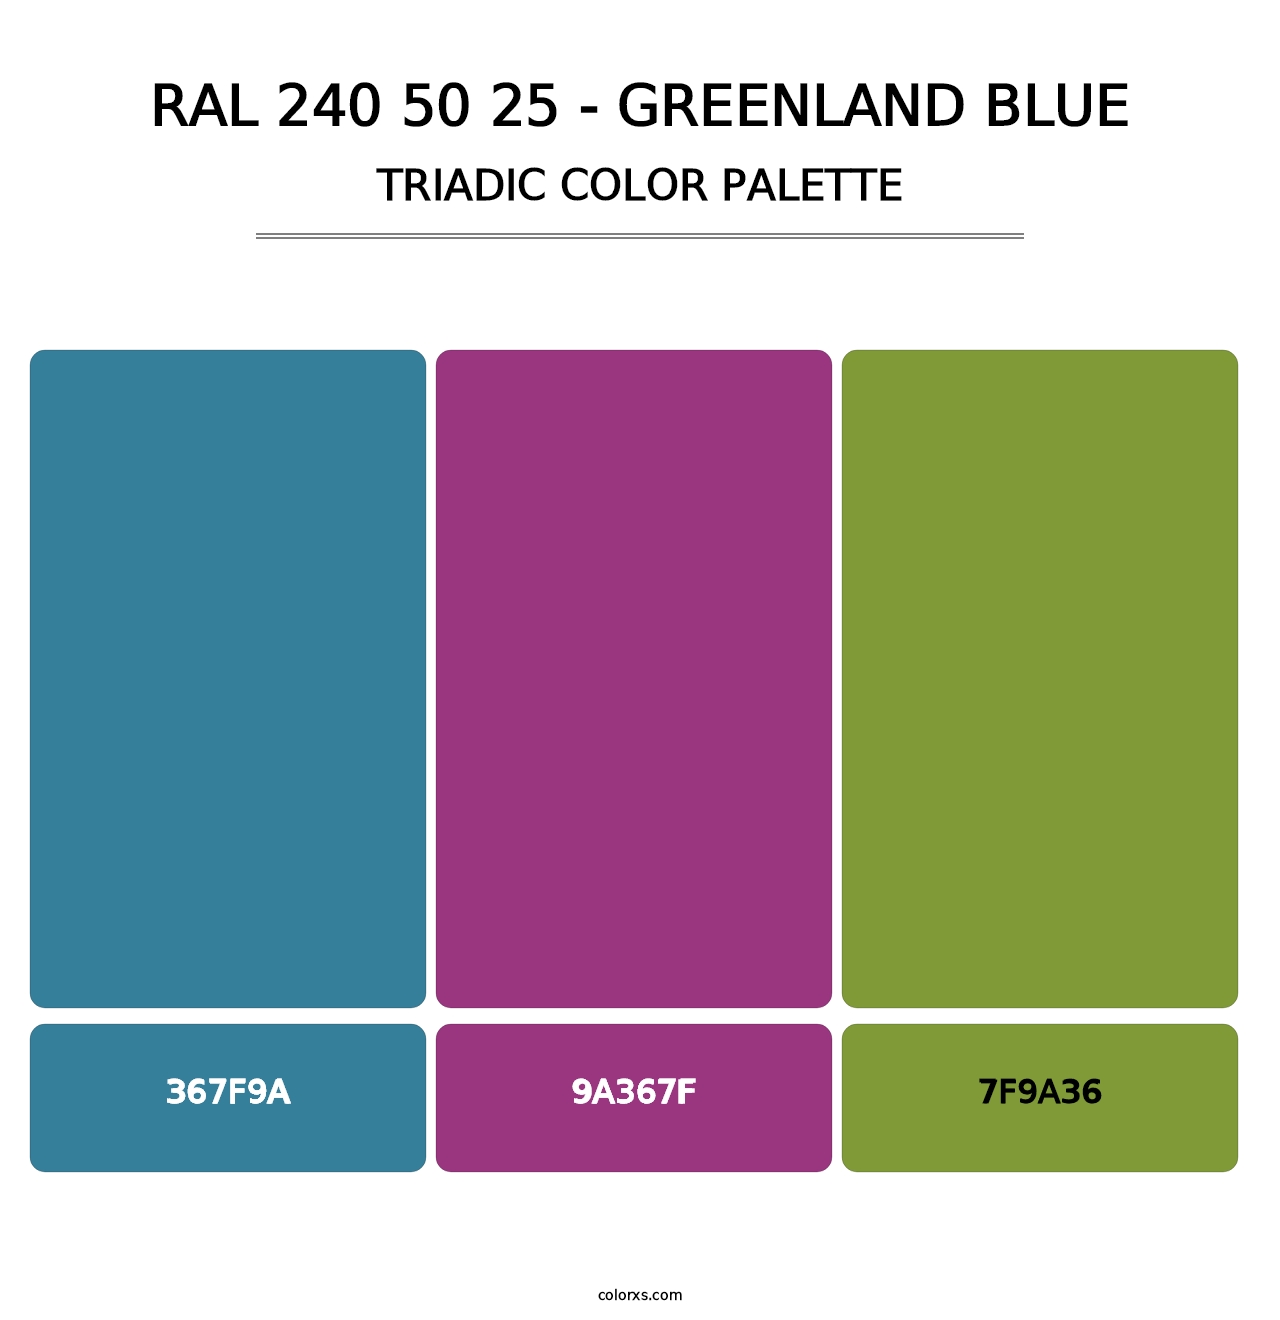 RAL 240 50 25 - Greenland Blue - Triadic Color Palette